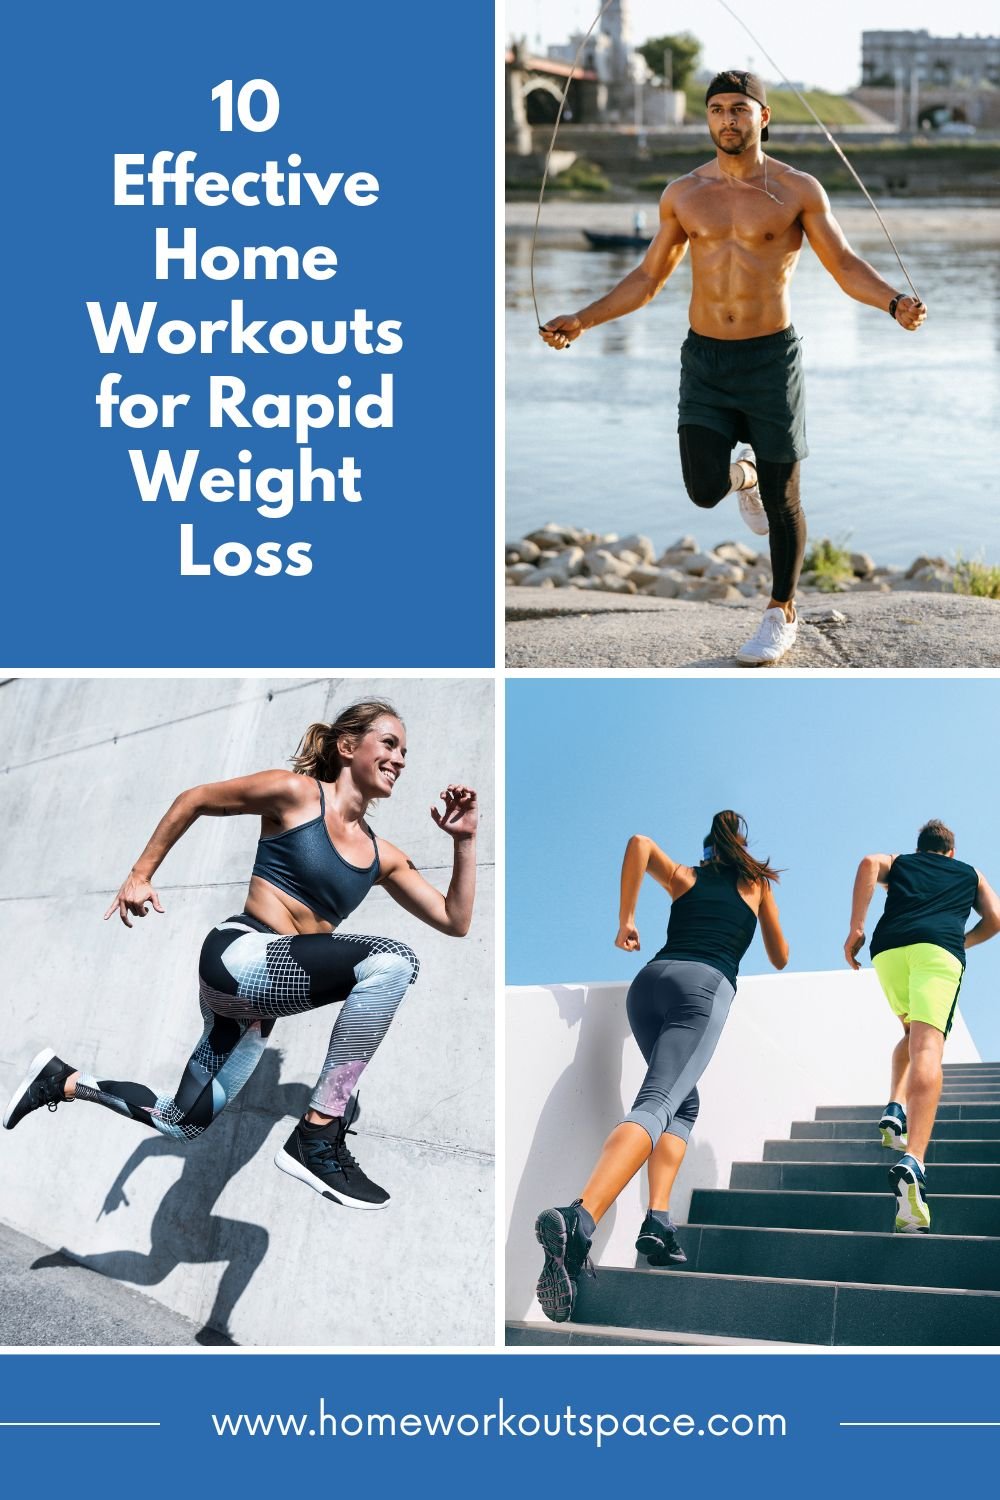 10 Effective Home Workouts for Rapid Weight Loss